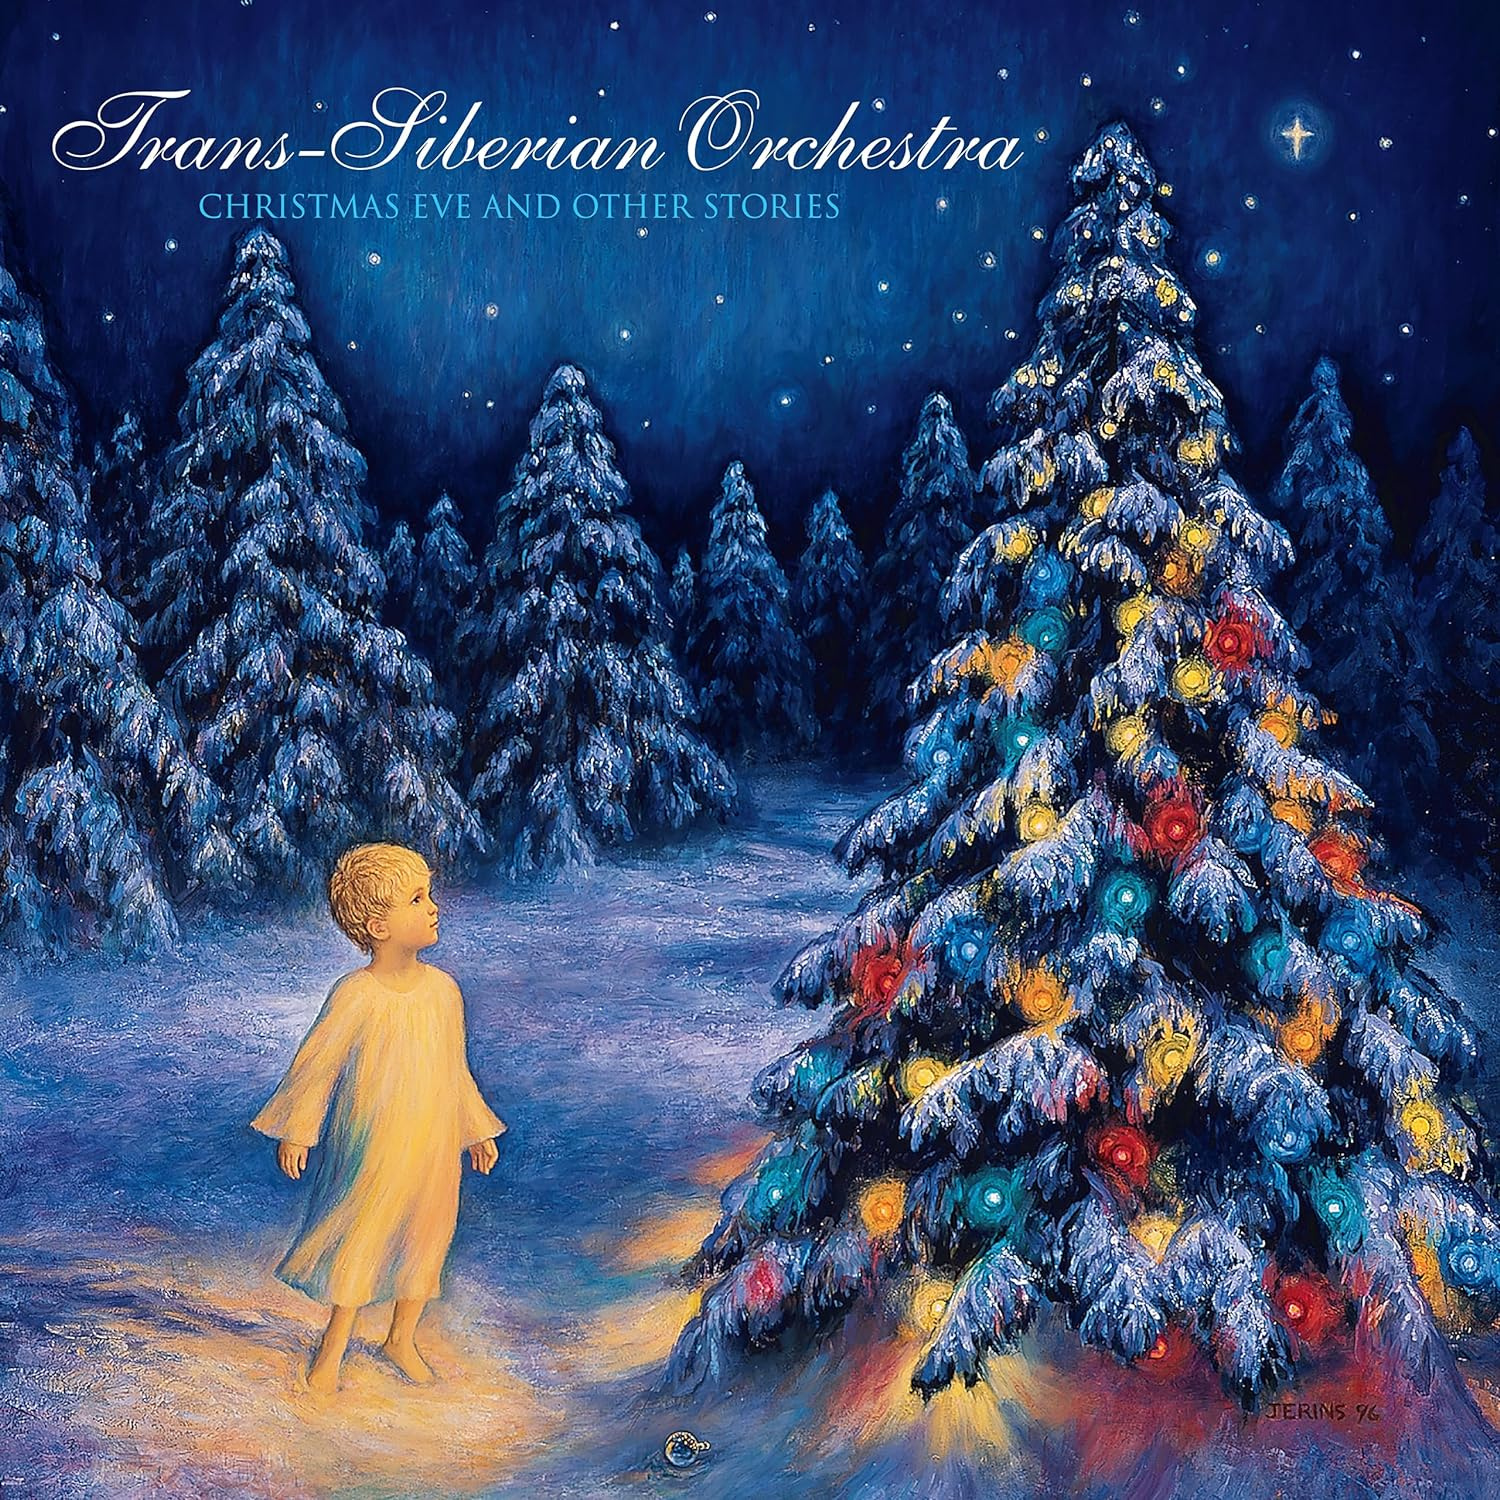 Trans-Siberian Orchestra - Christmas Eve And Other Stories vinyl cover